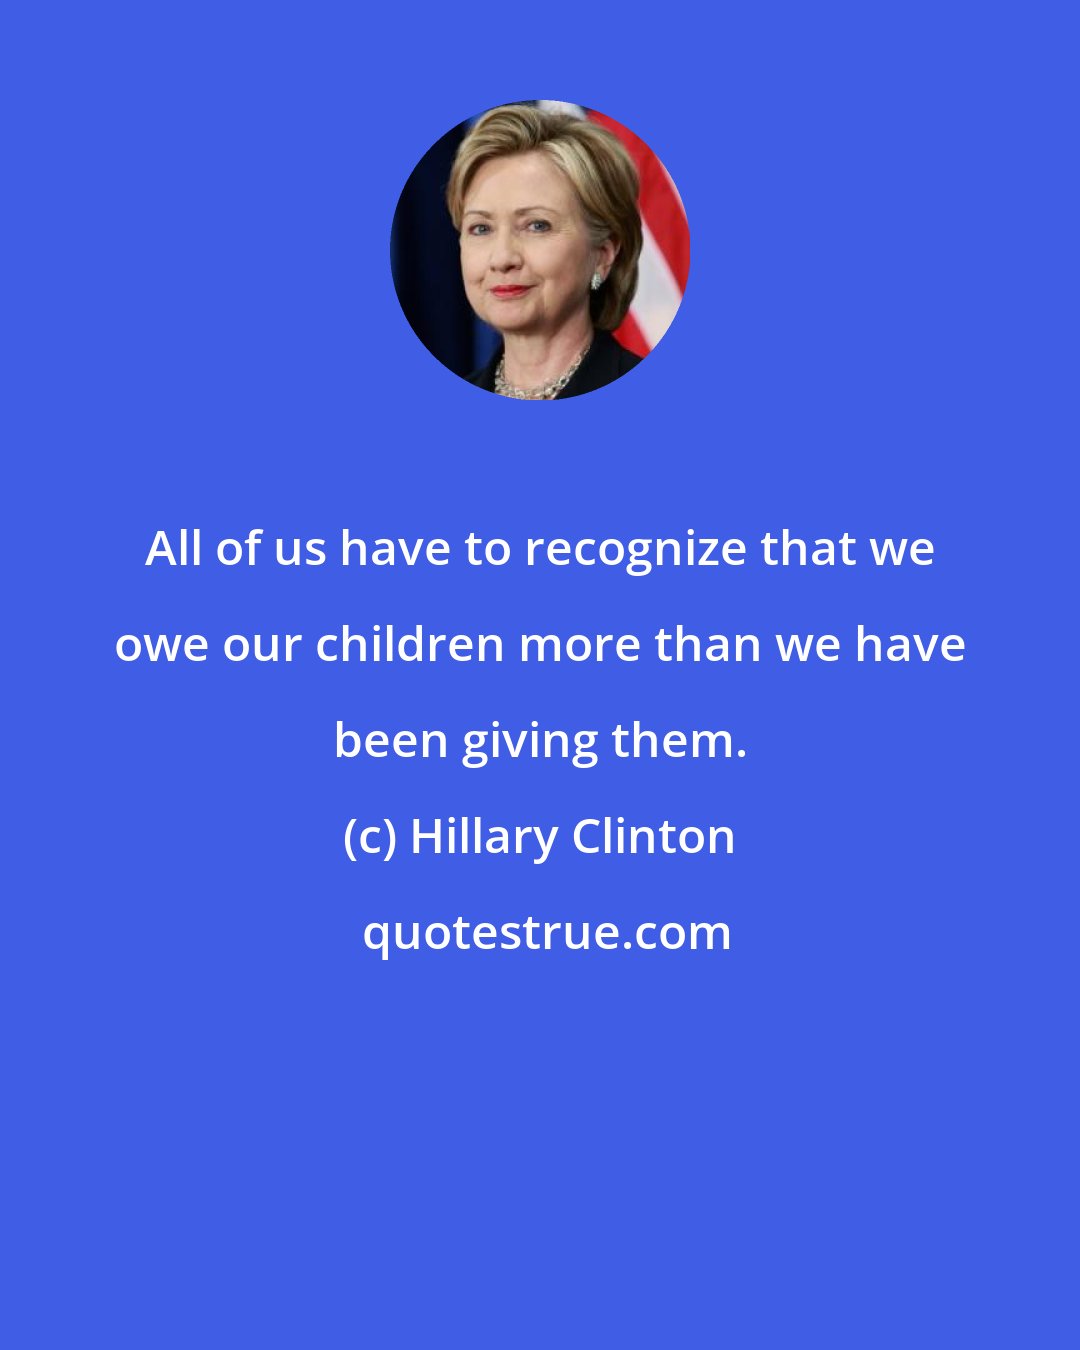 Hillary Clinton: All of us have to recognize that we owe our children more than we have been giving them.